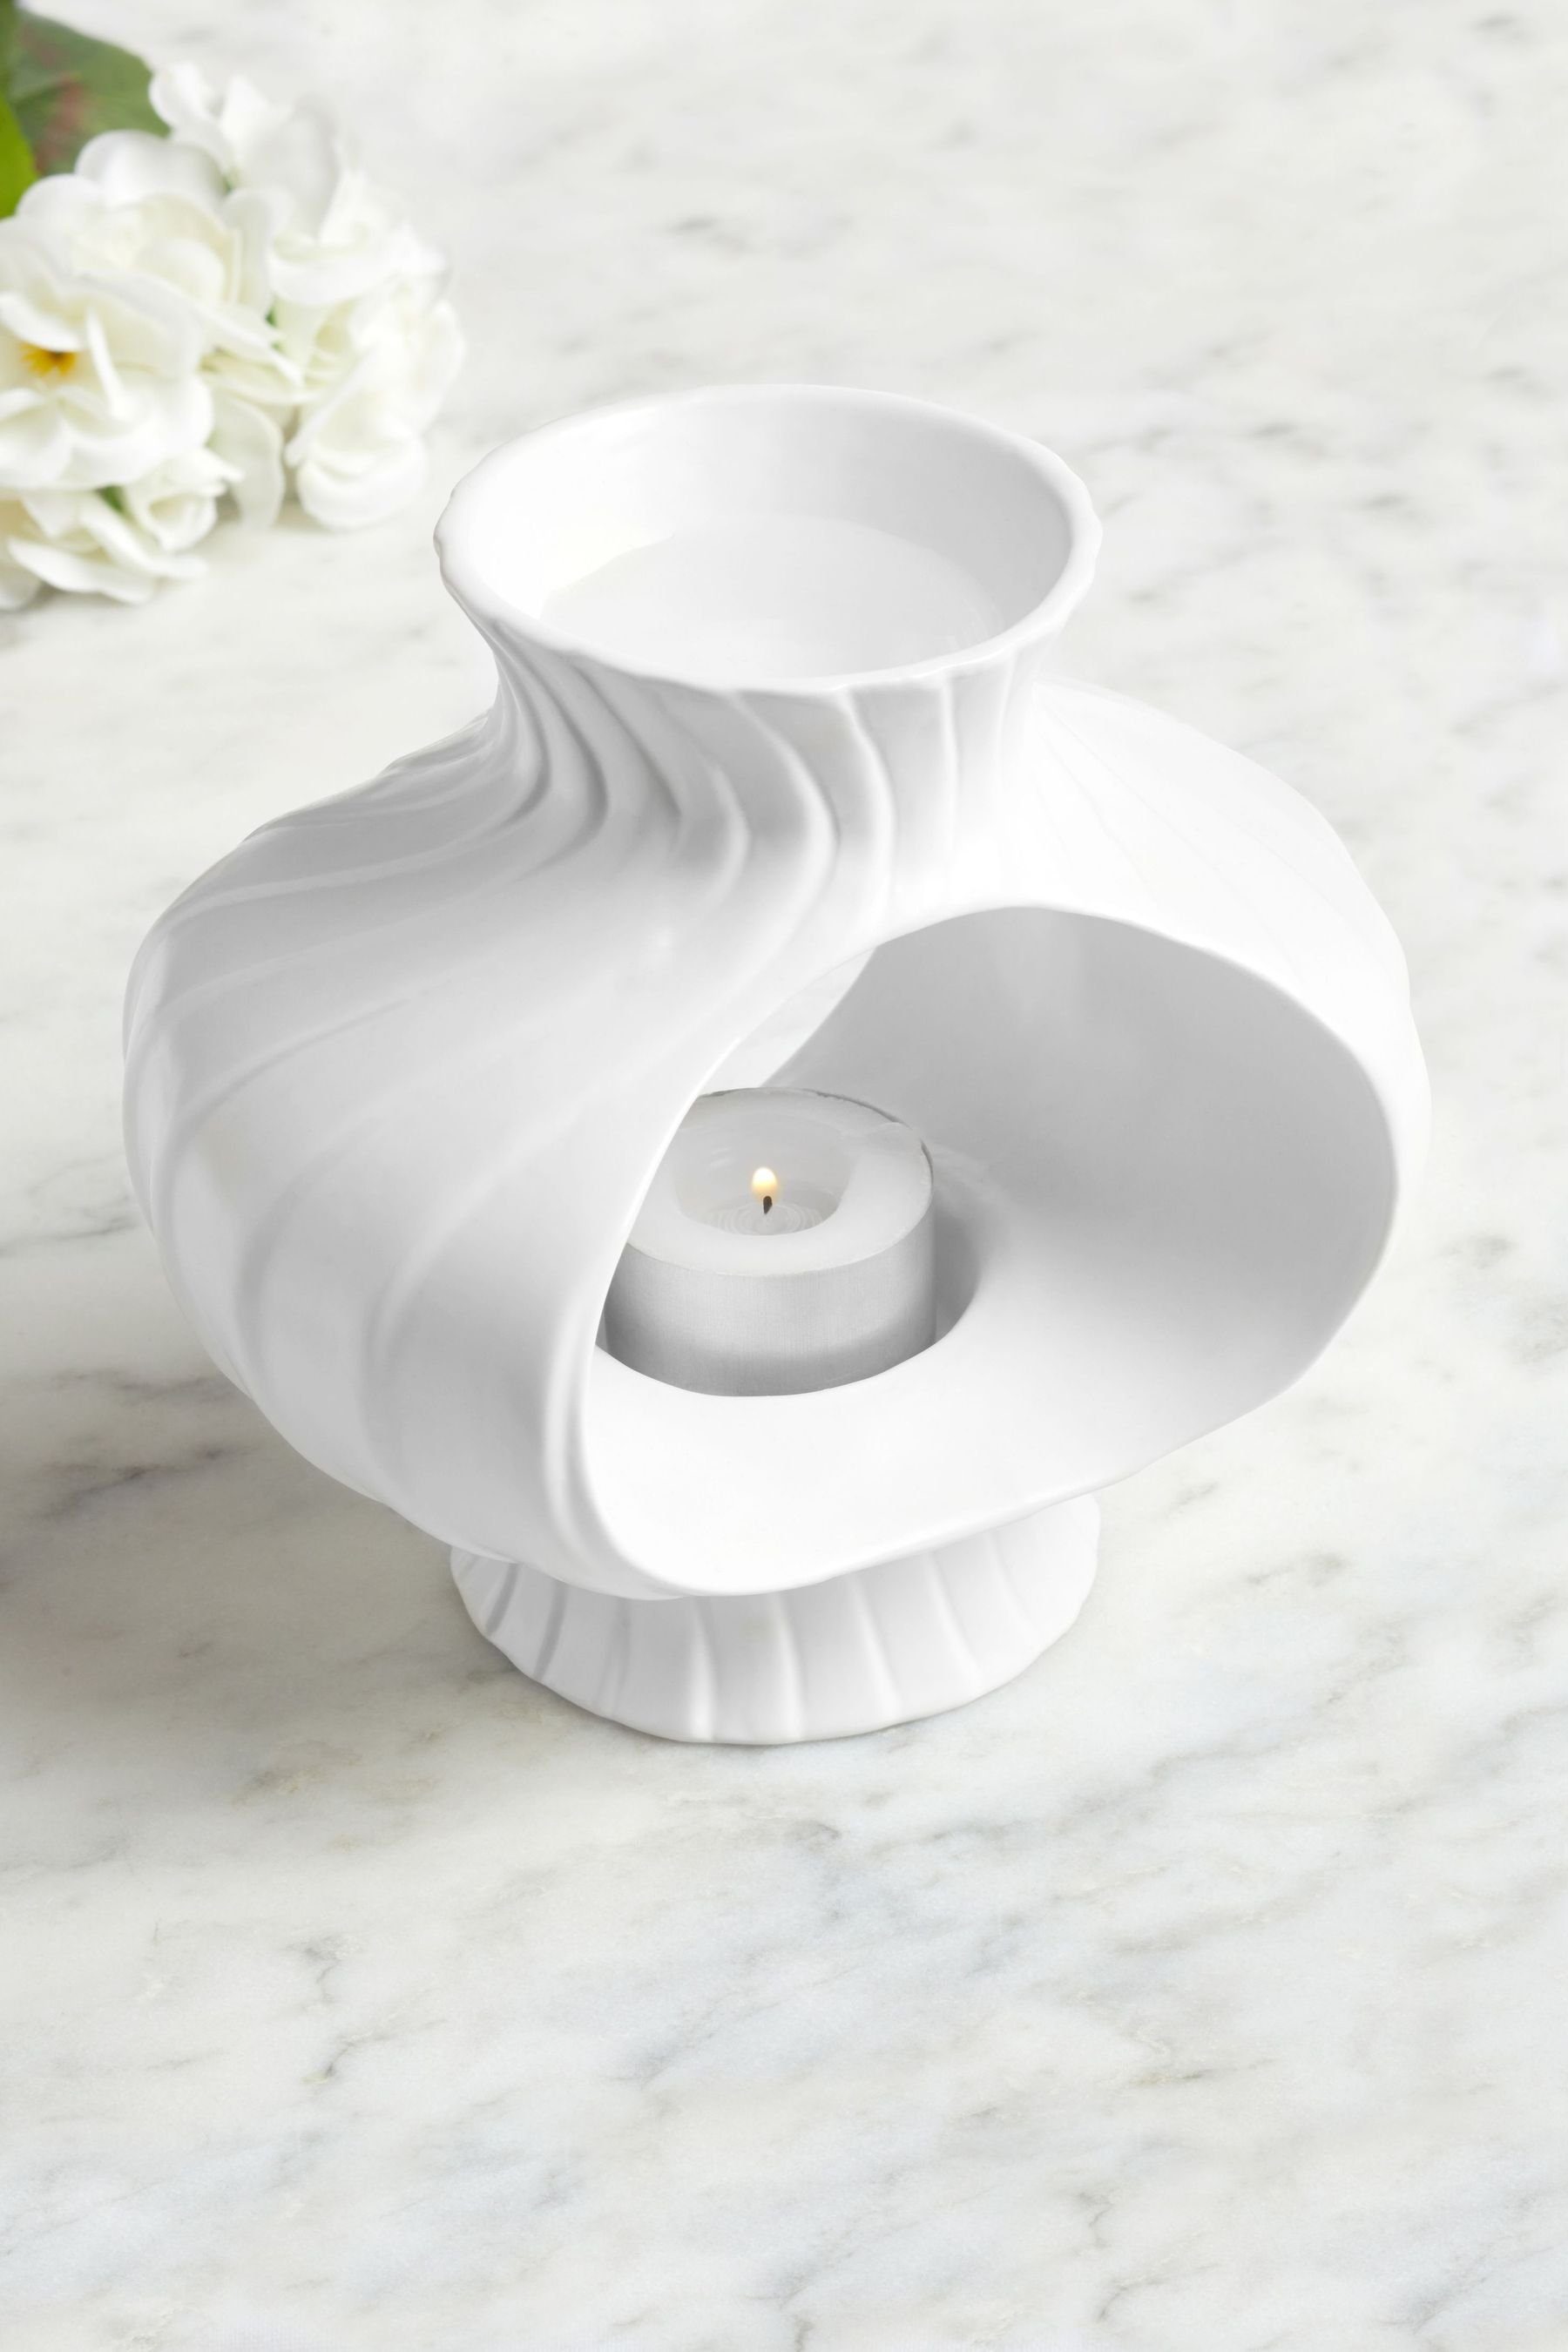 Duft-Burner Luxe Duftlampe Wachs-Melt New Collection York Next